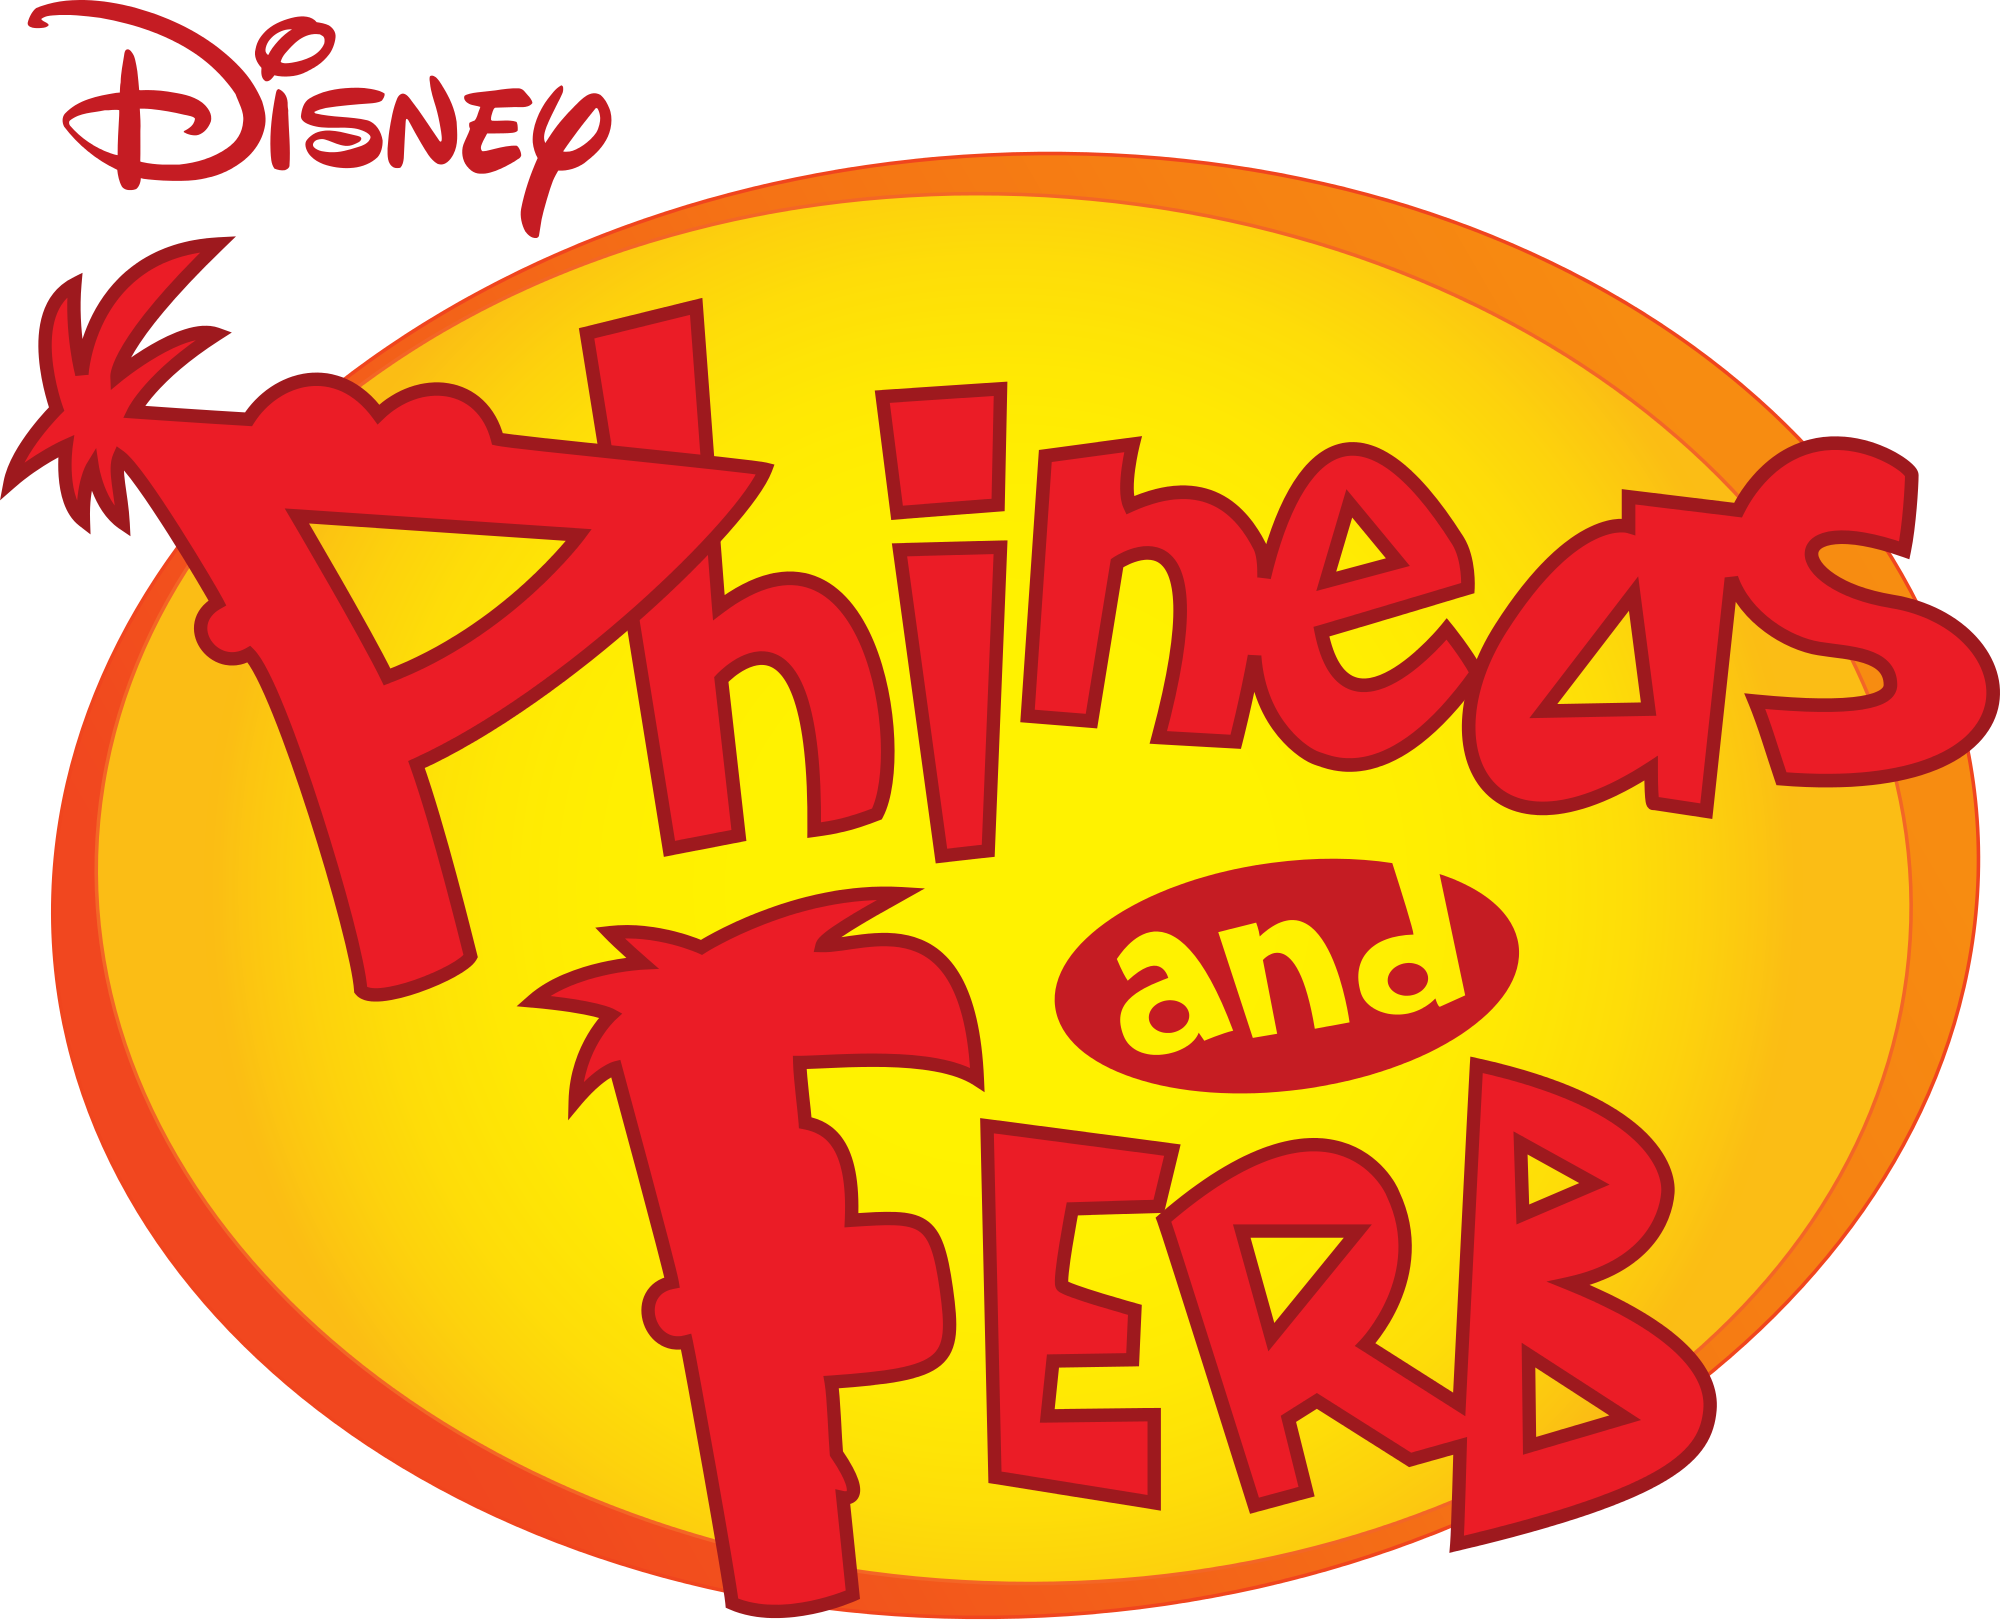 Phineas And Ferb Show Girls Porn - Phineas and Ferb | Disney Wiki | FANDOM powered by Wikia